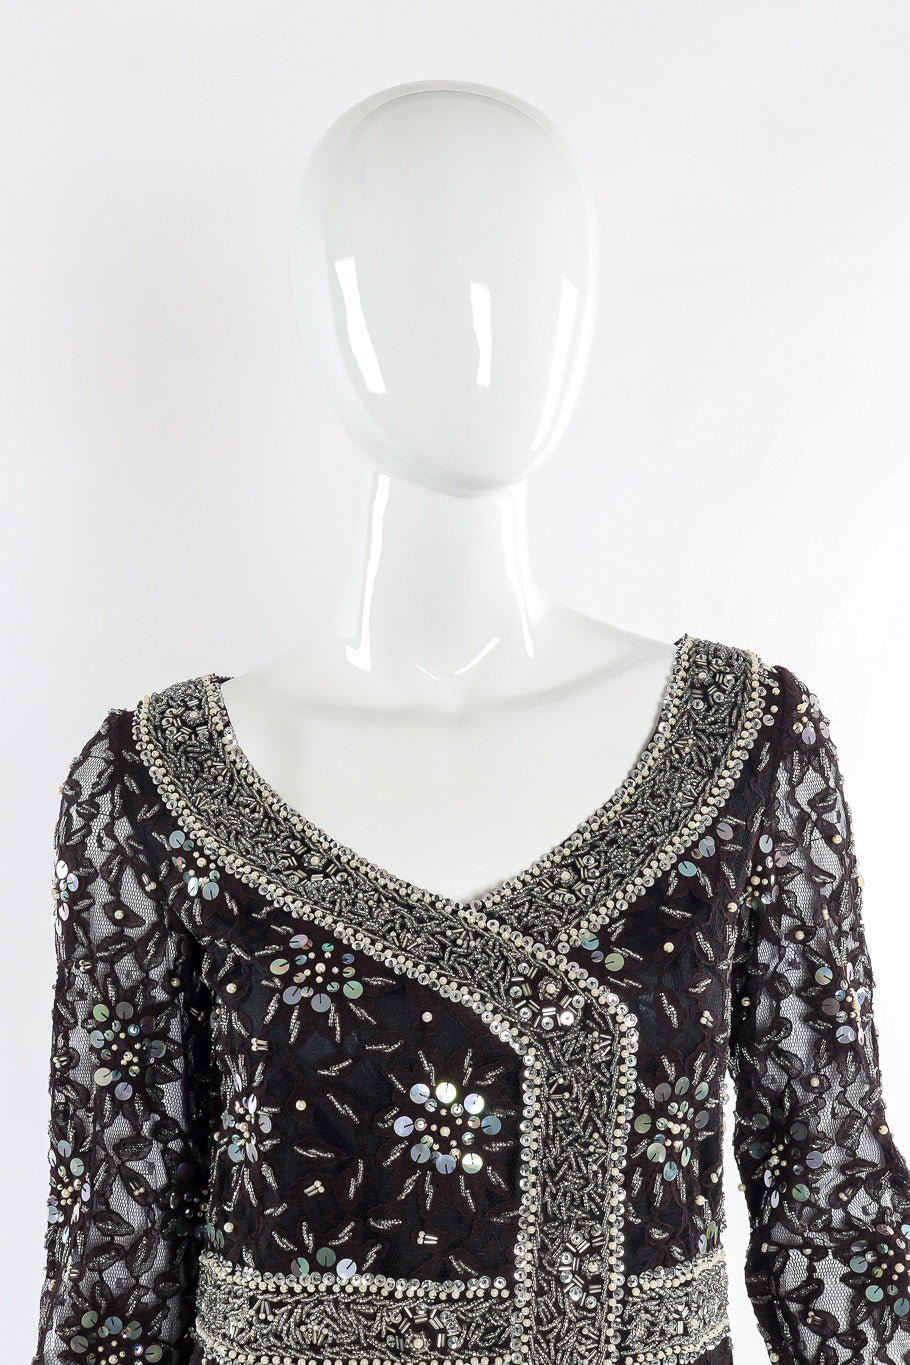 Vintage beaded and sequin lace set top close-up. @recessla